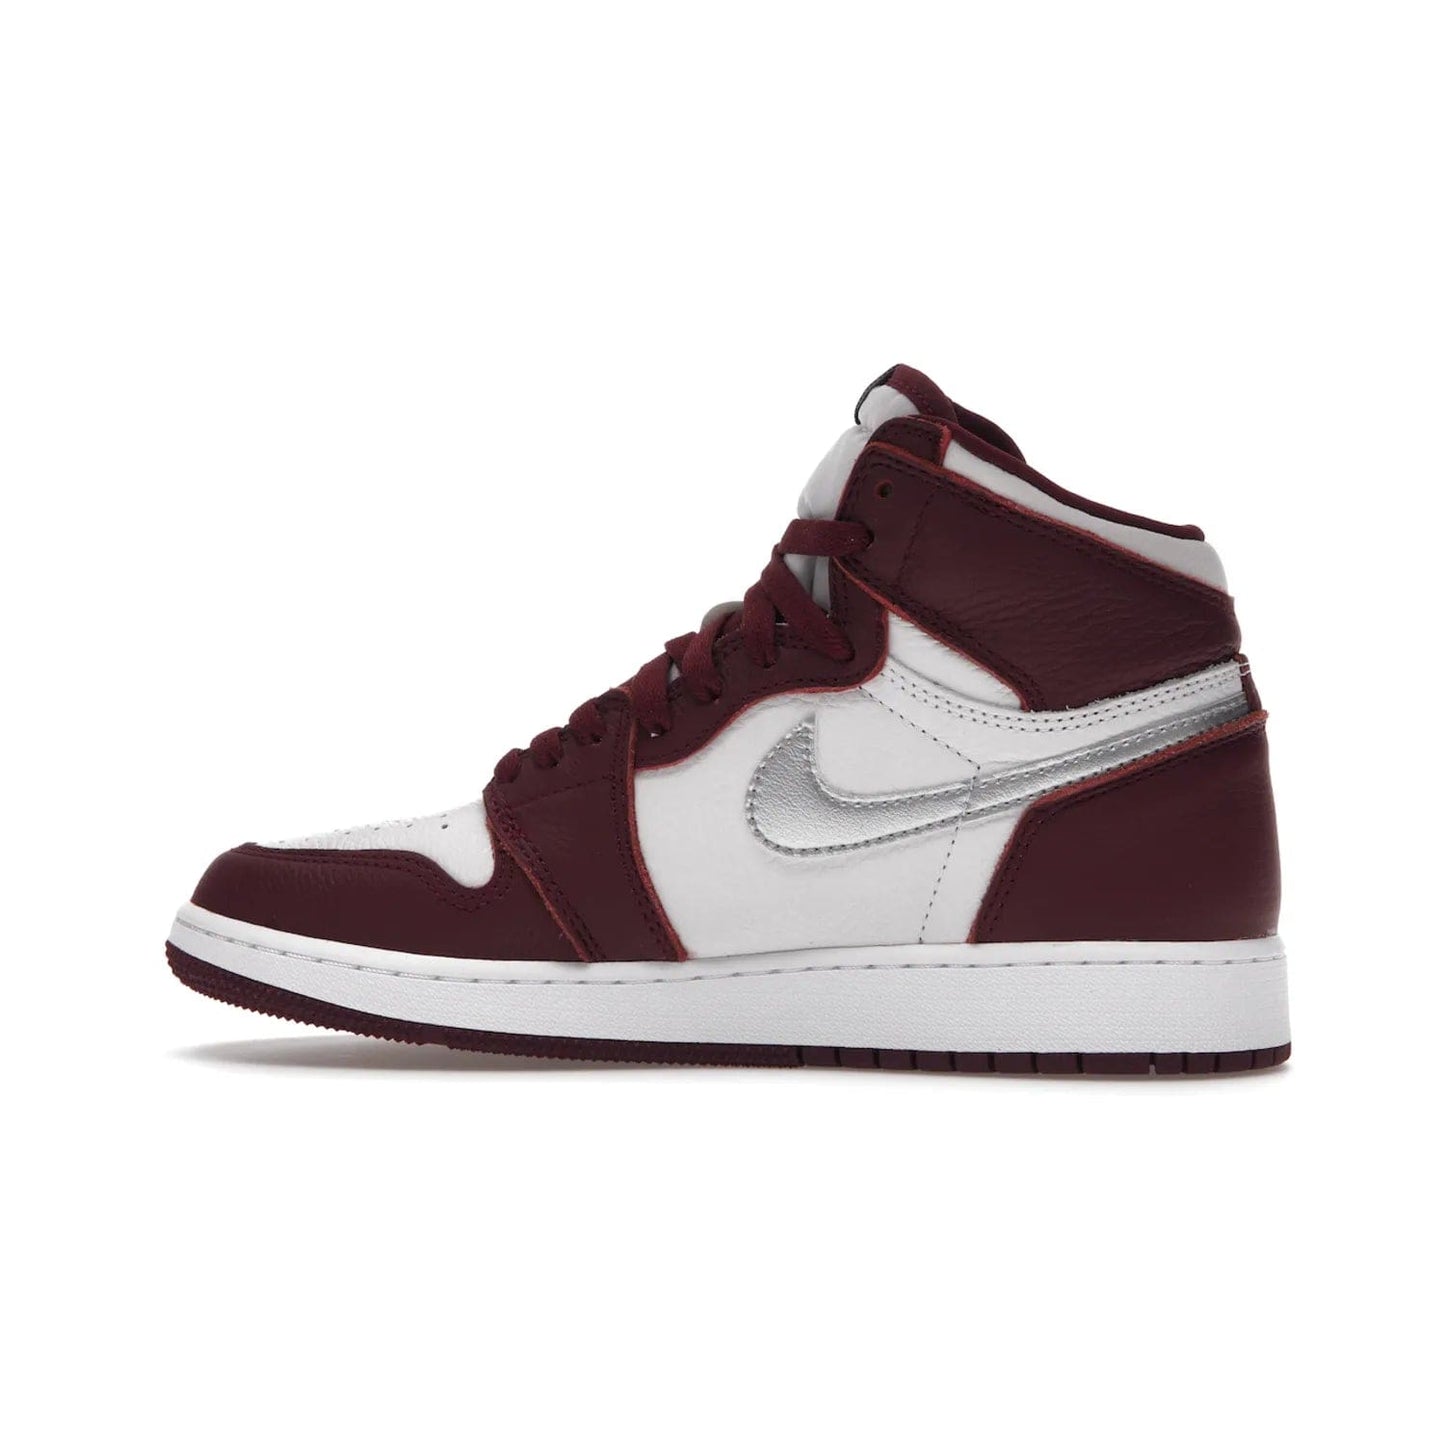 Jordan 1 Retro High OG Bordeaux (GS) - Image 20 - Only at www.BallersClubKickz.com - #
Introducing the Air Jordan 1 Retro High OG Bordeaux GS – a signature colorway part of the Jordan Brand Fall 2021 lineup. White leather upper & Bordeaux overlays, metallic silver swoosh, jeweled Air Jordan Wings logo & more. Step up your style game with this sleek fall season silhouette.